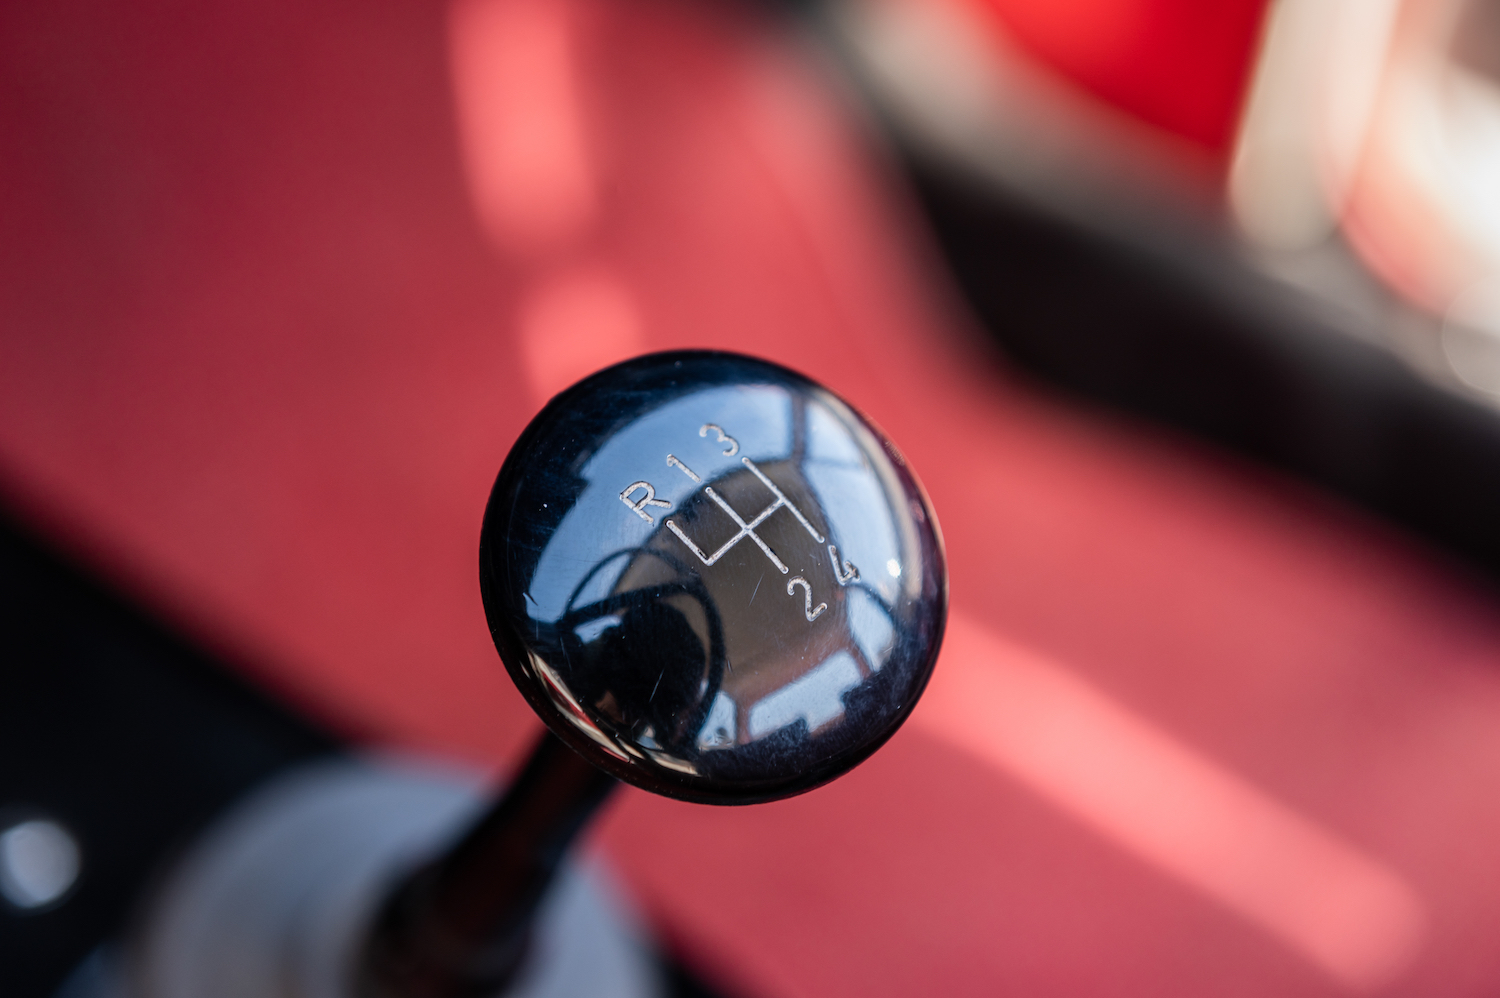 Closeup of a manual transmission truck's shift lever.